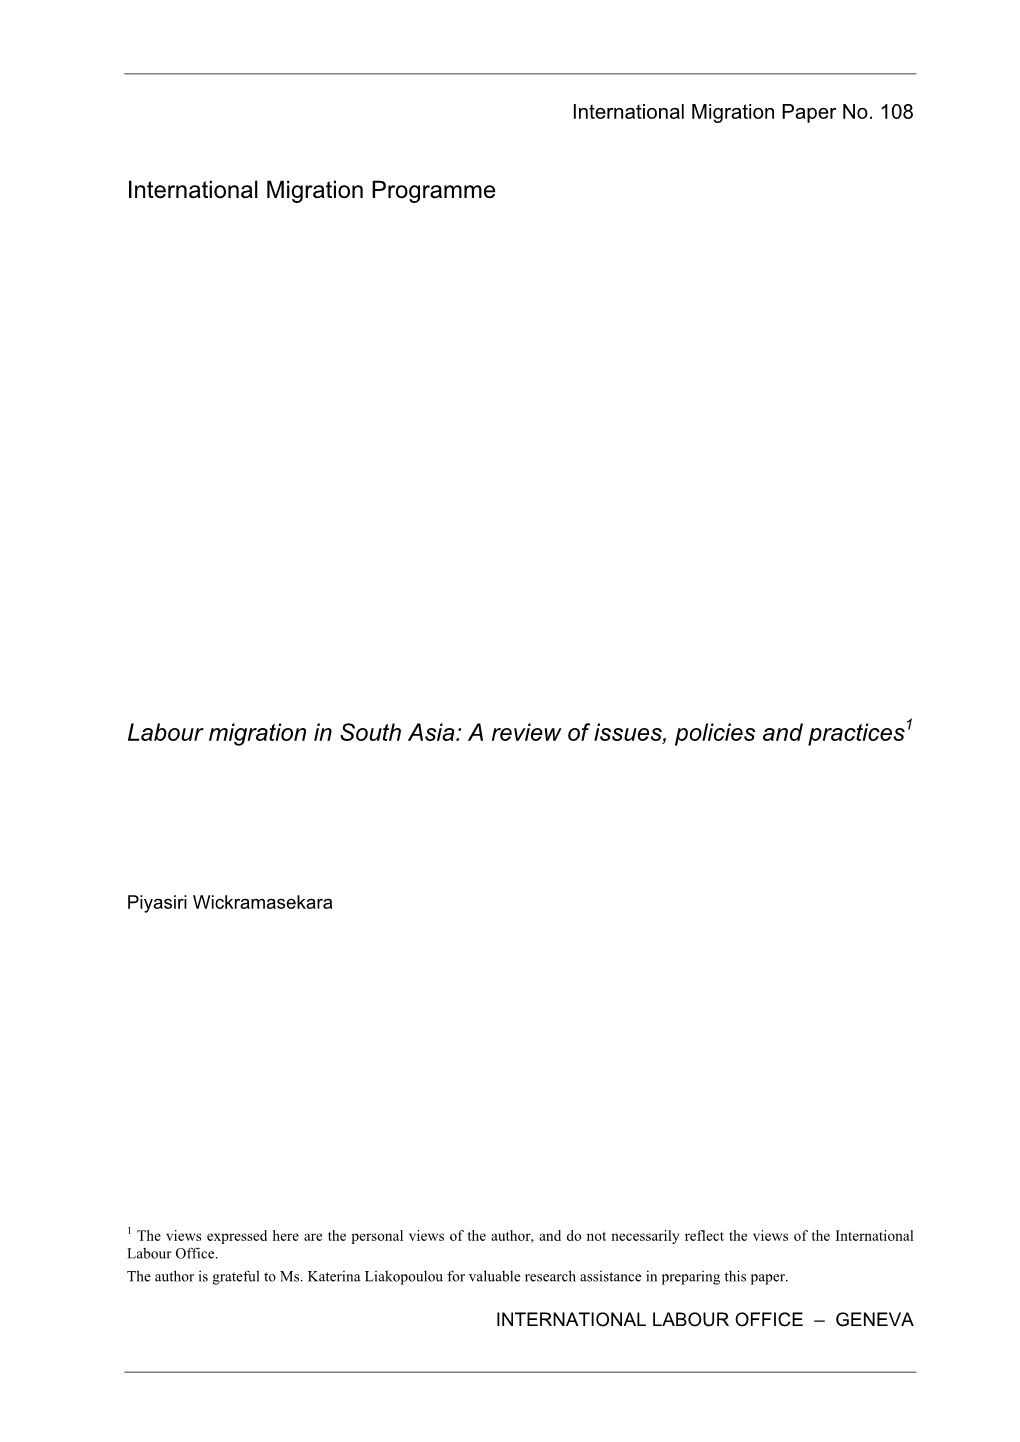 Labour Migration in South Asia: a Review of Issues, Policies and Practices1